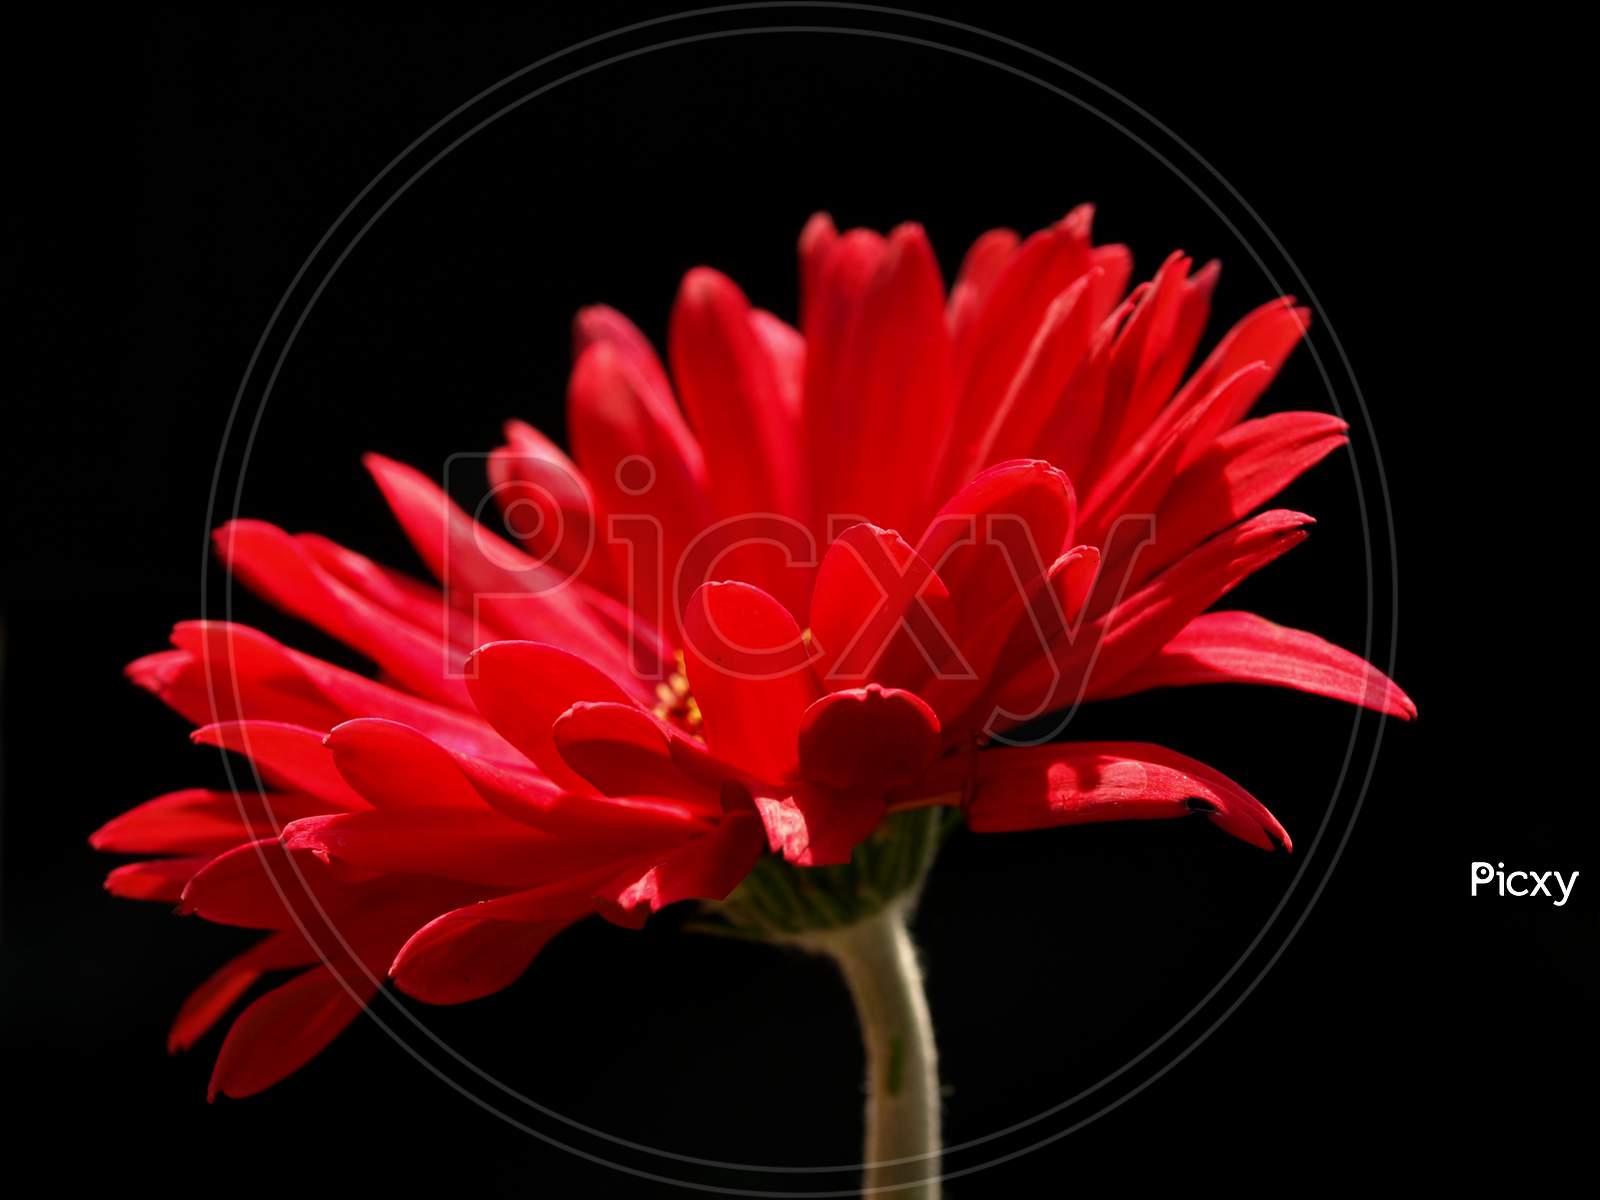 Lights And Shades On The Flower Accentuated By The Dark Background